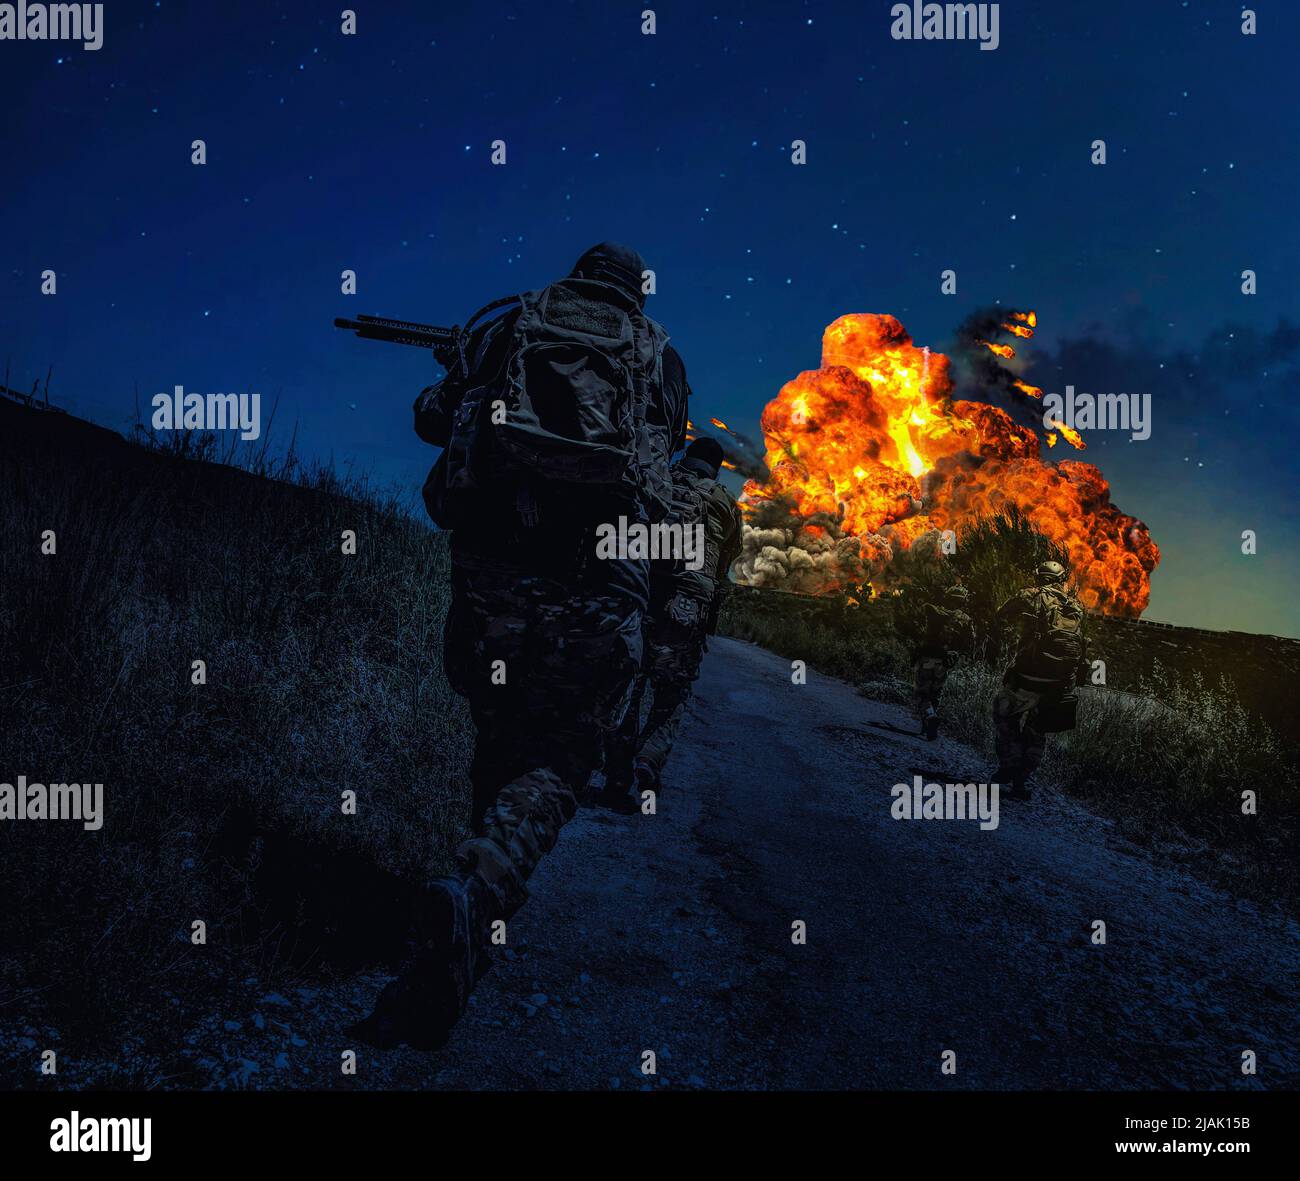 Soldiers rushing down a dirt road attacking enemy at night, with a powerful explosion on horizon. Stock Photo